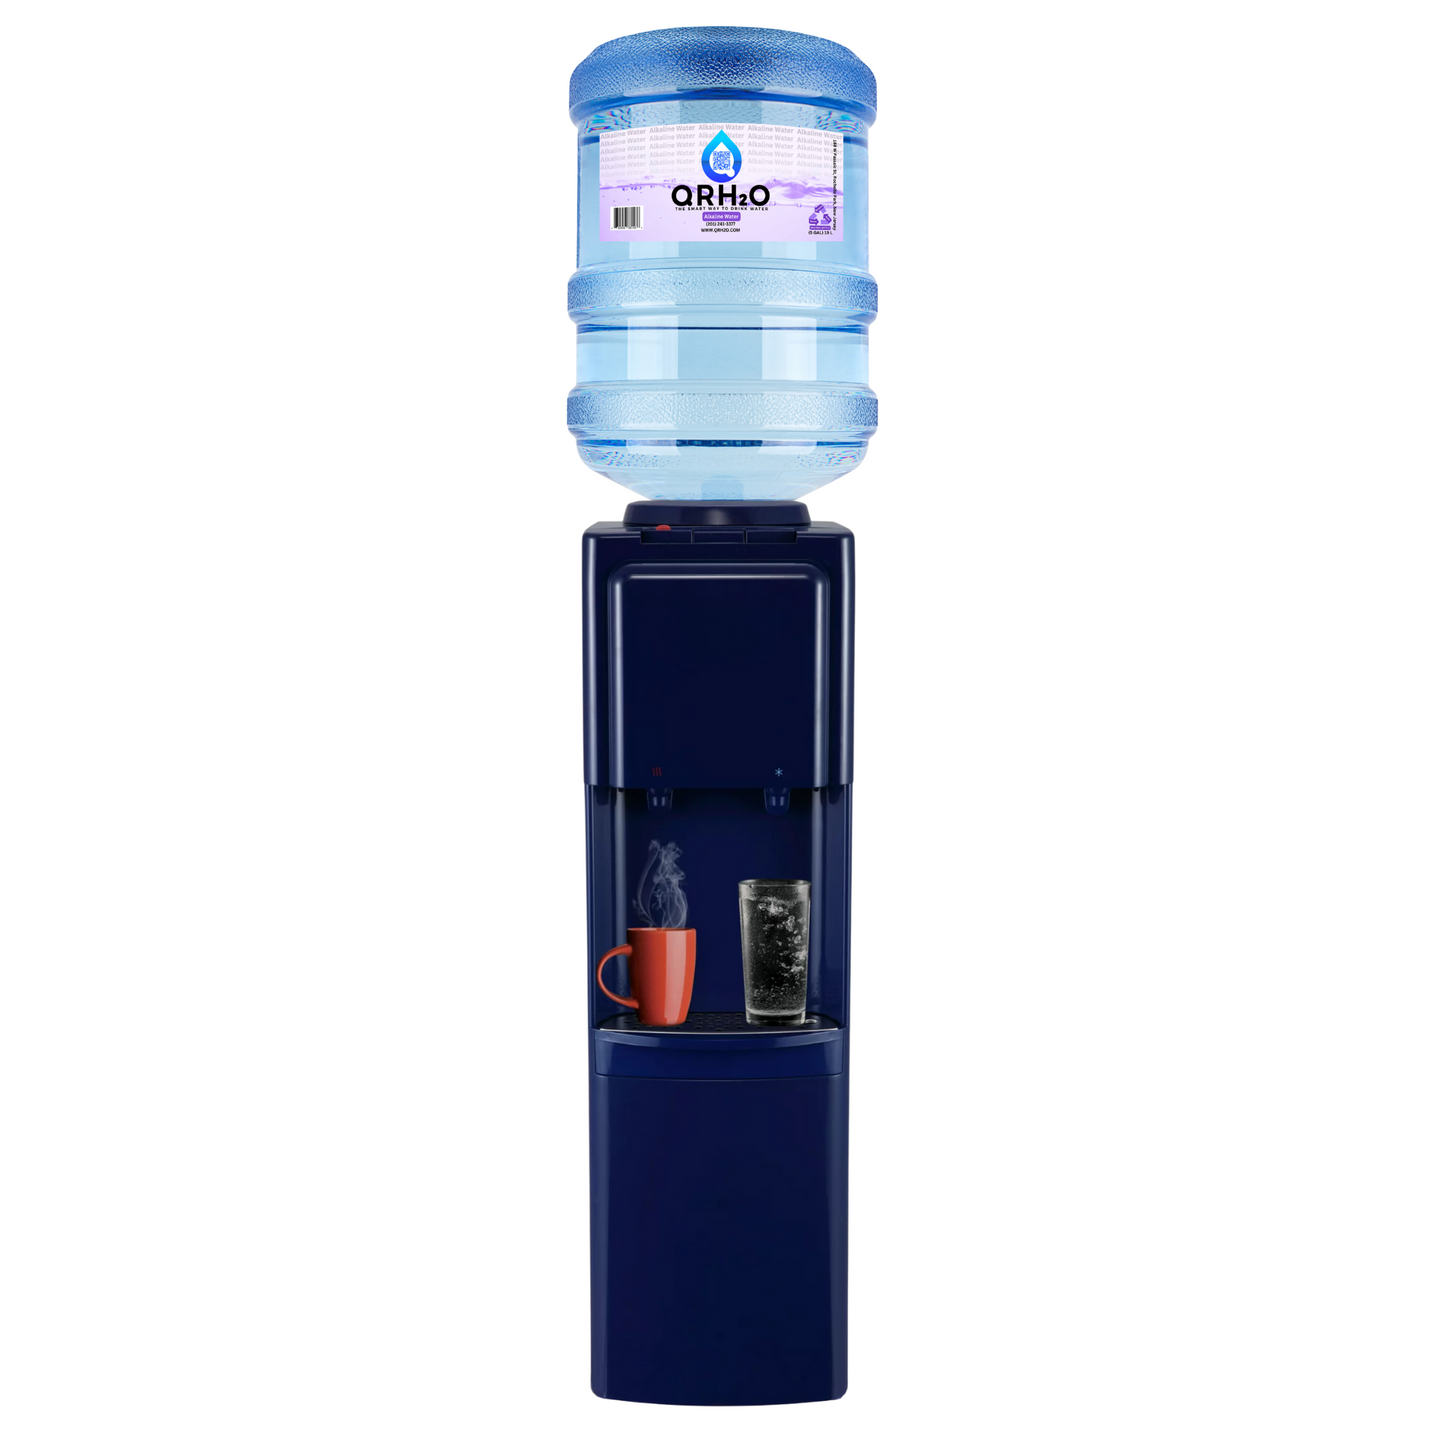 5-Gallon Water Dispenser in navy blue, top loading design with hot and cold water options, from the brand Primo.